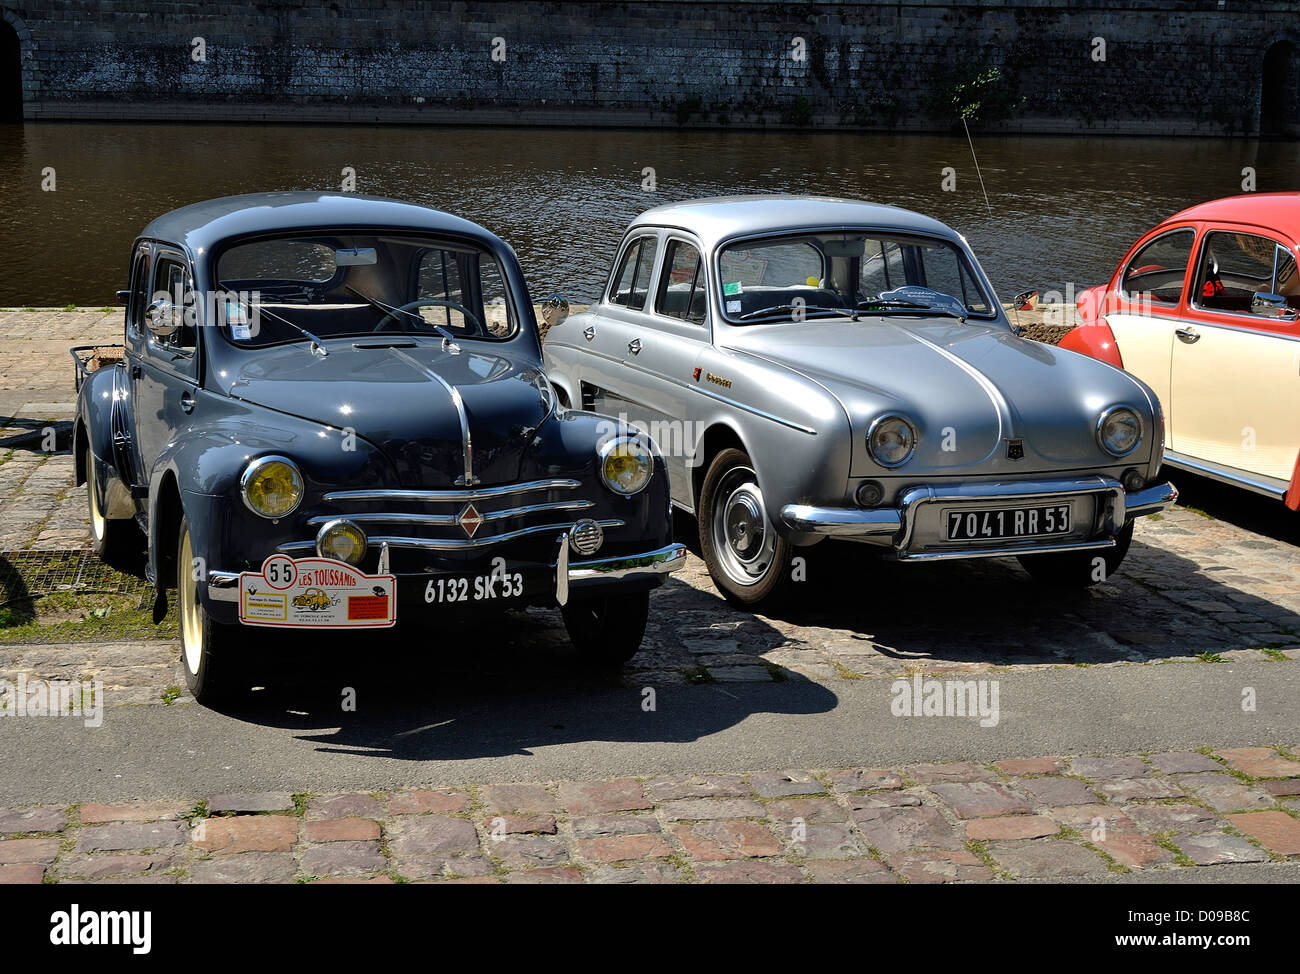 Exhibition of old cars : Renault 4 CV and Renault Dauphine. Manufactured by Renault in France. Stock Photo